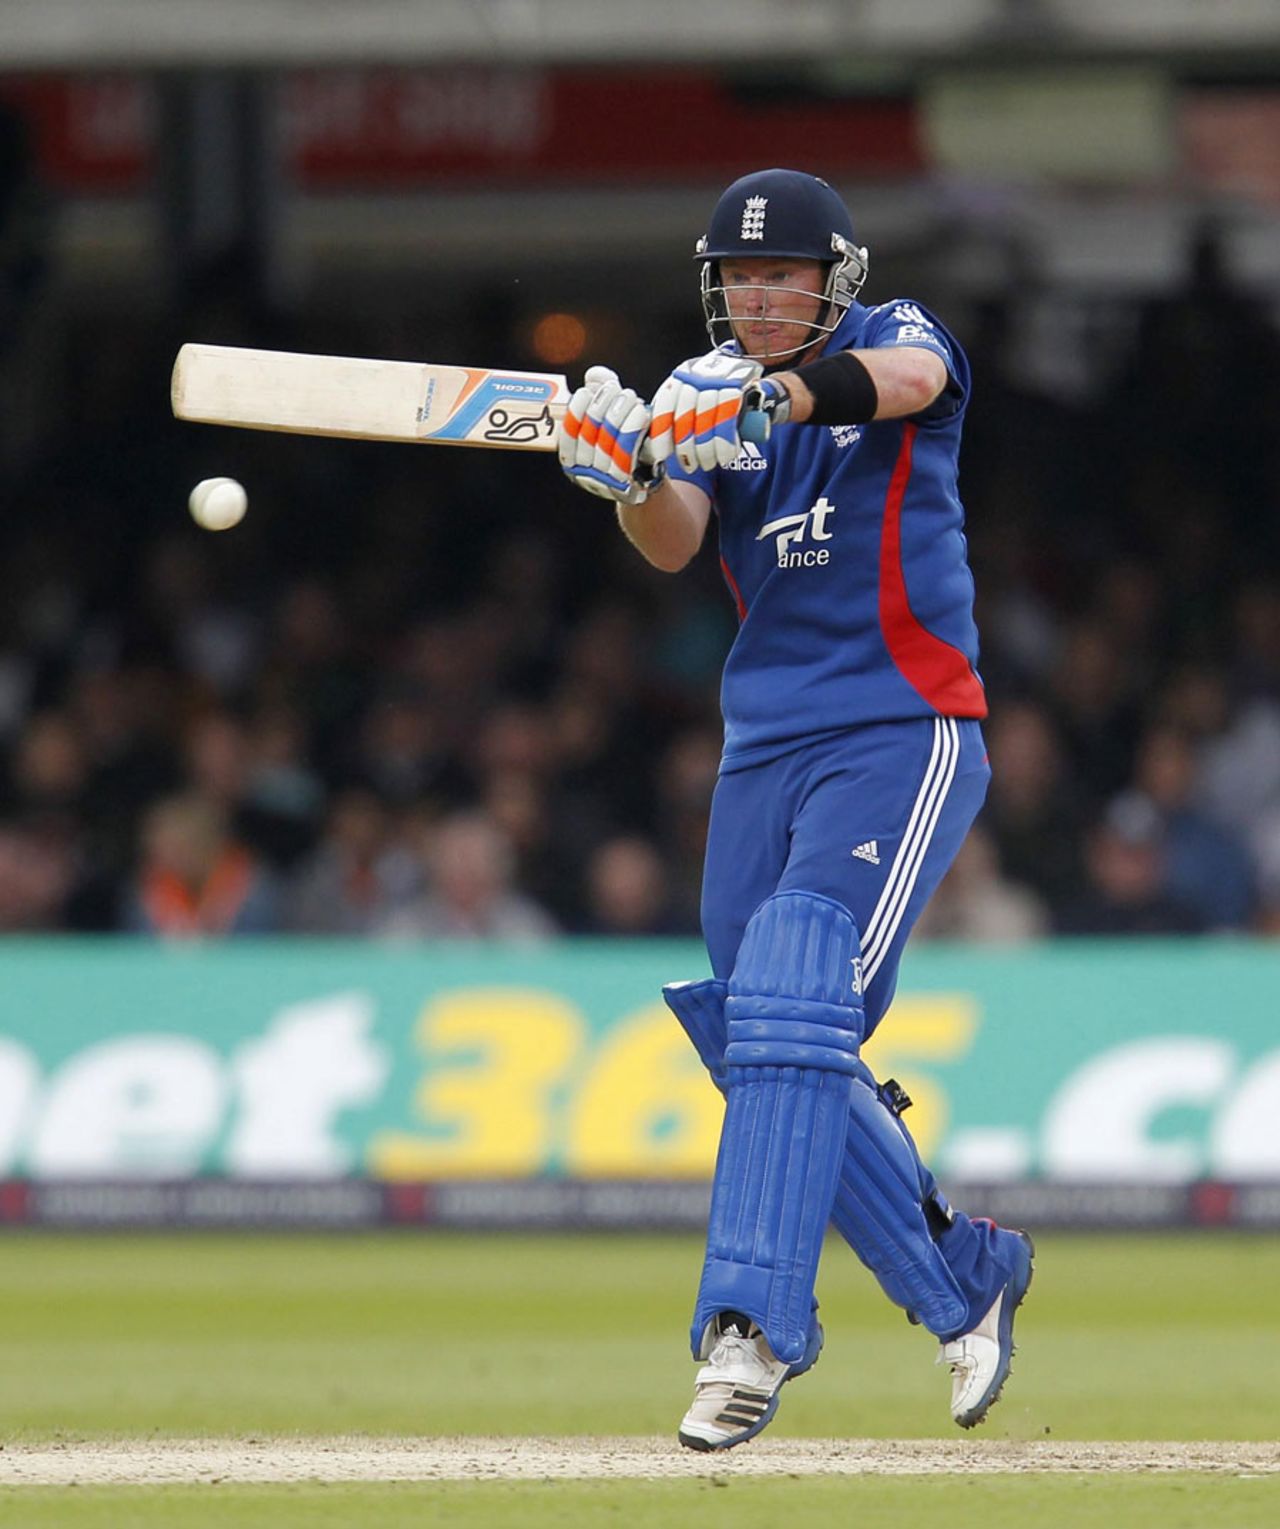 Ian Bell was in fluent touch, England v South Africa, 4th ODI, Lord's, September 2, 2012